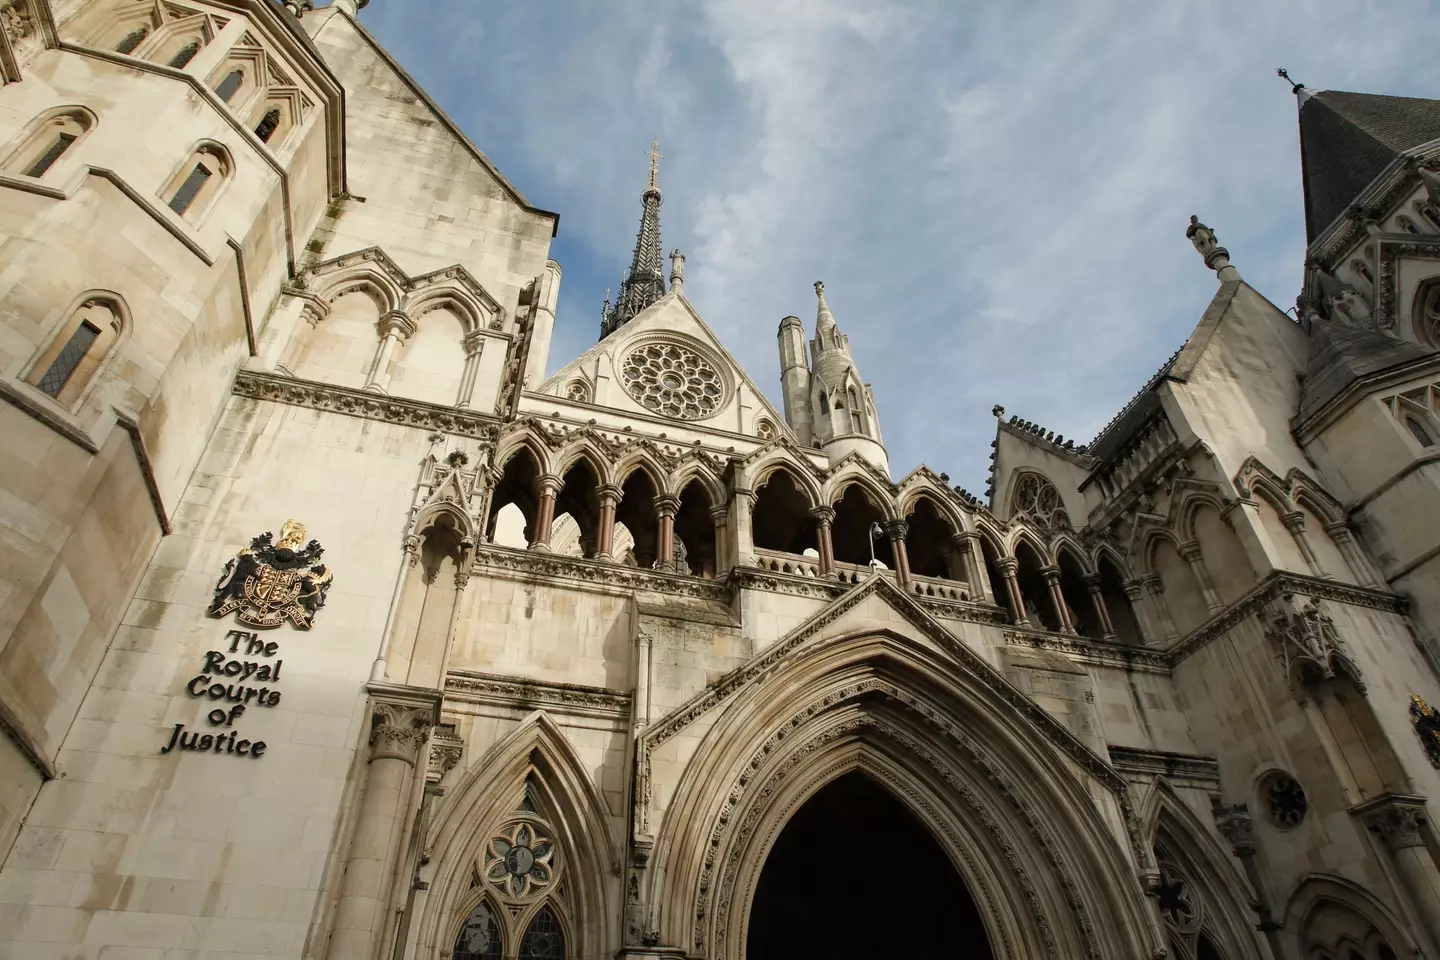 The case is being heard at the High Court in London.